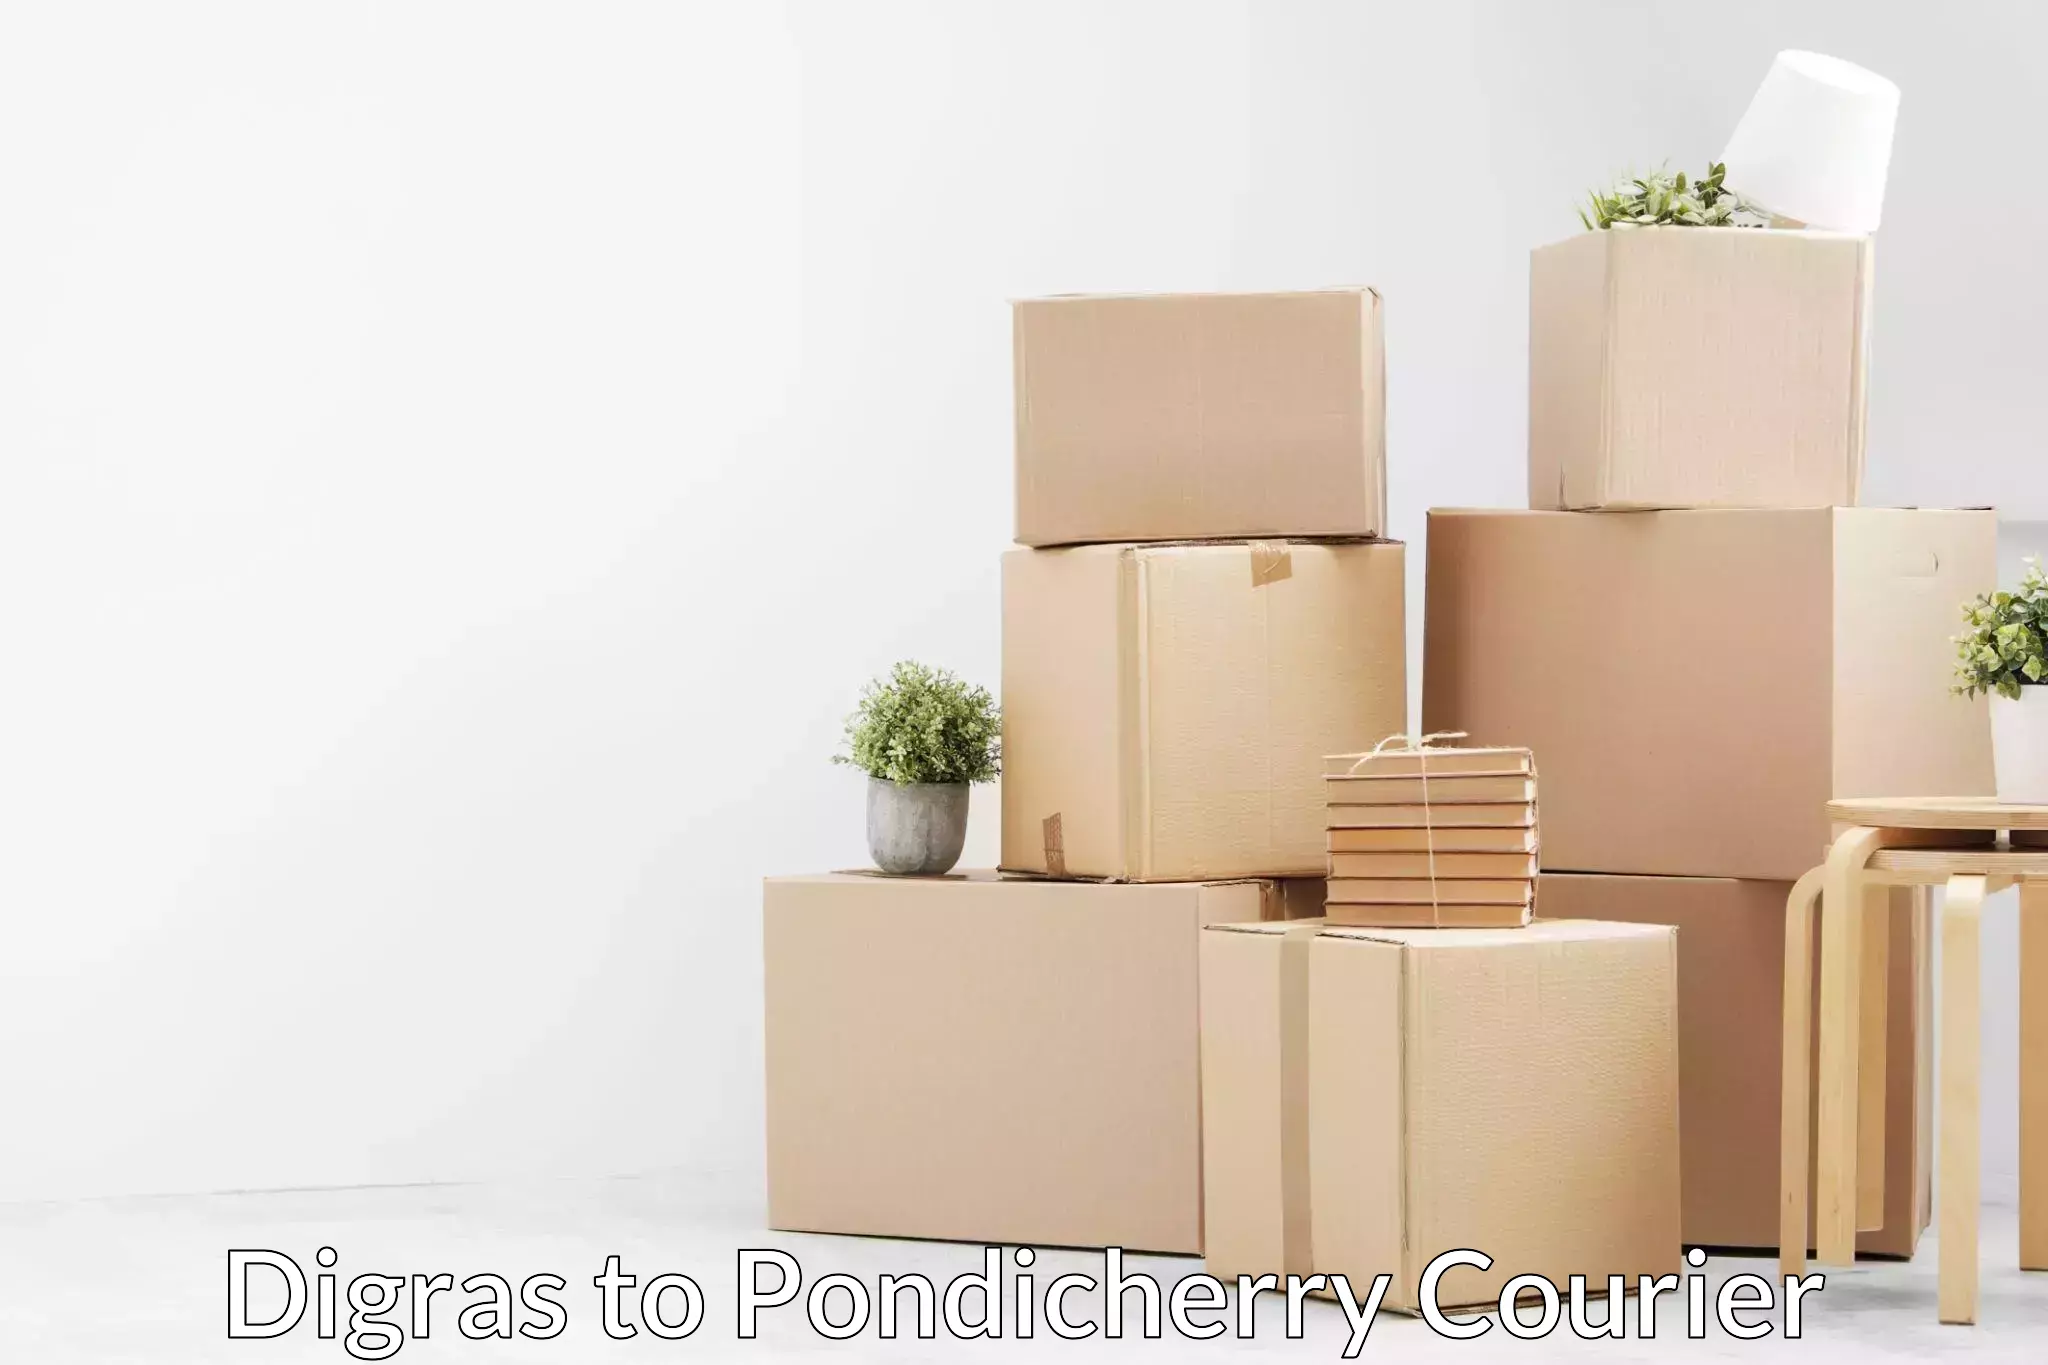 High-quality moving services in Digras to Pondicherry